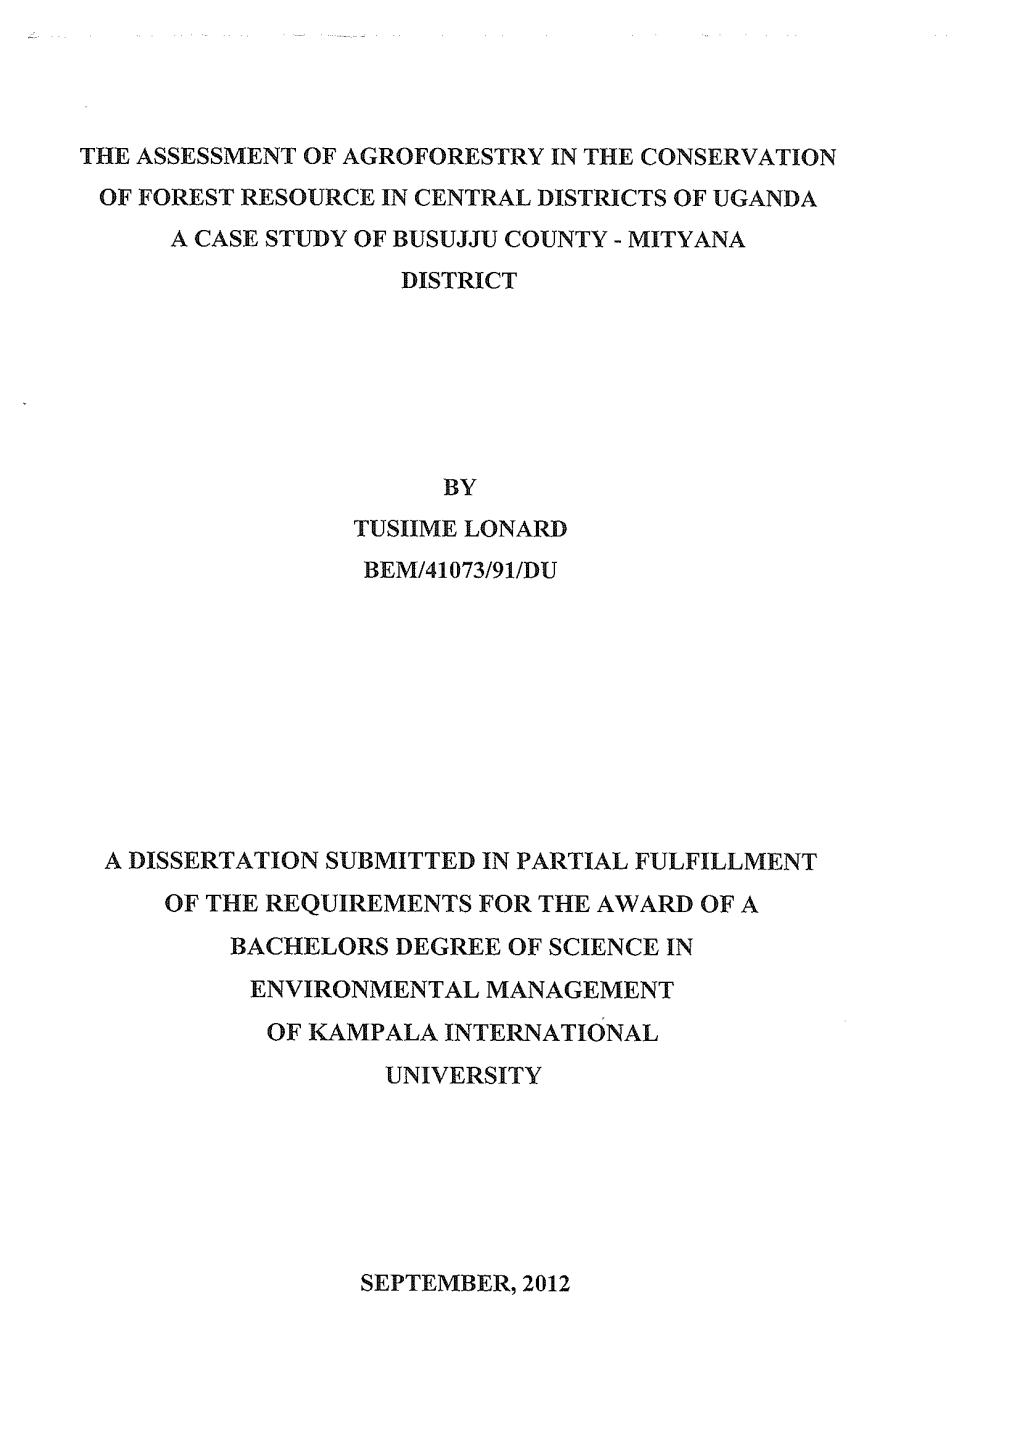 The Assessment of Agroforestry in the Conservation of Forest Resource in Central Districts of Uganda a Case Study of Busujju